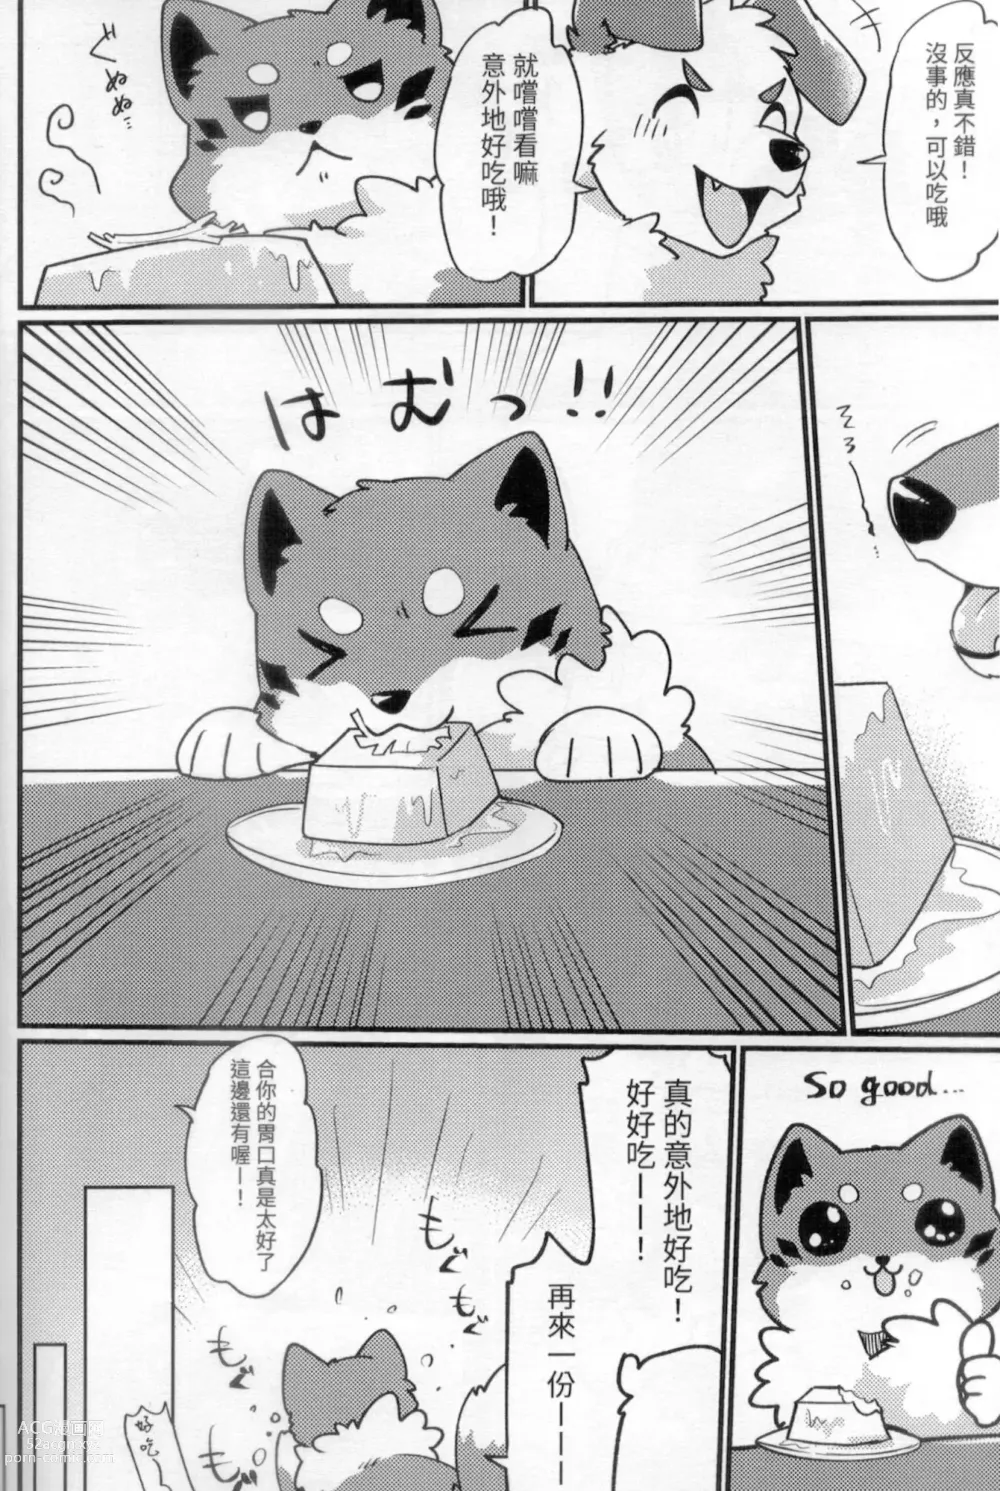 Page 5 of doujinshi 狐犬台灣美食旅